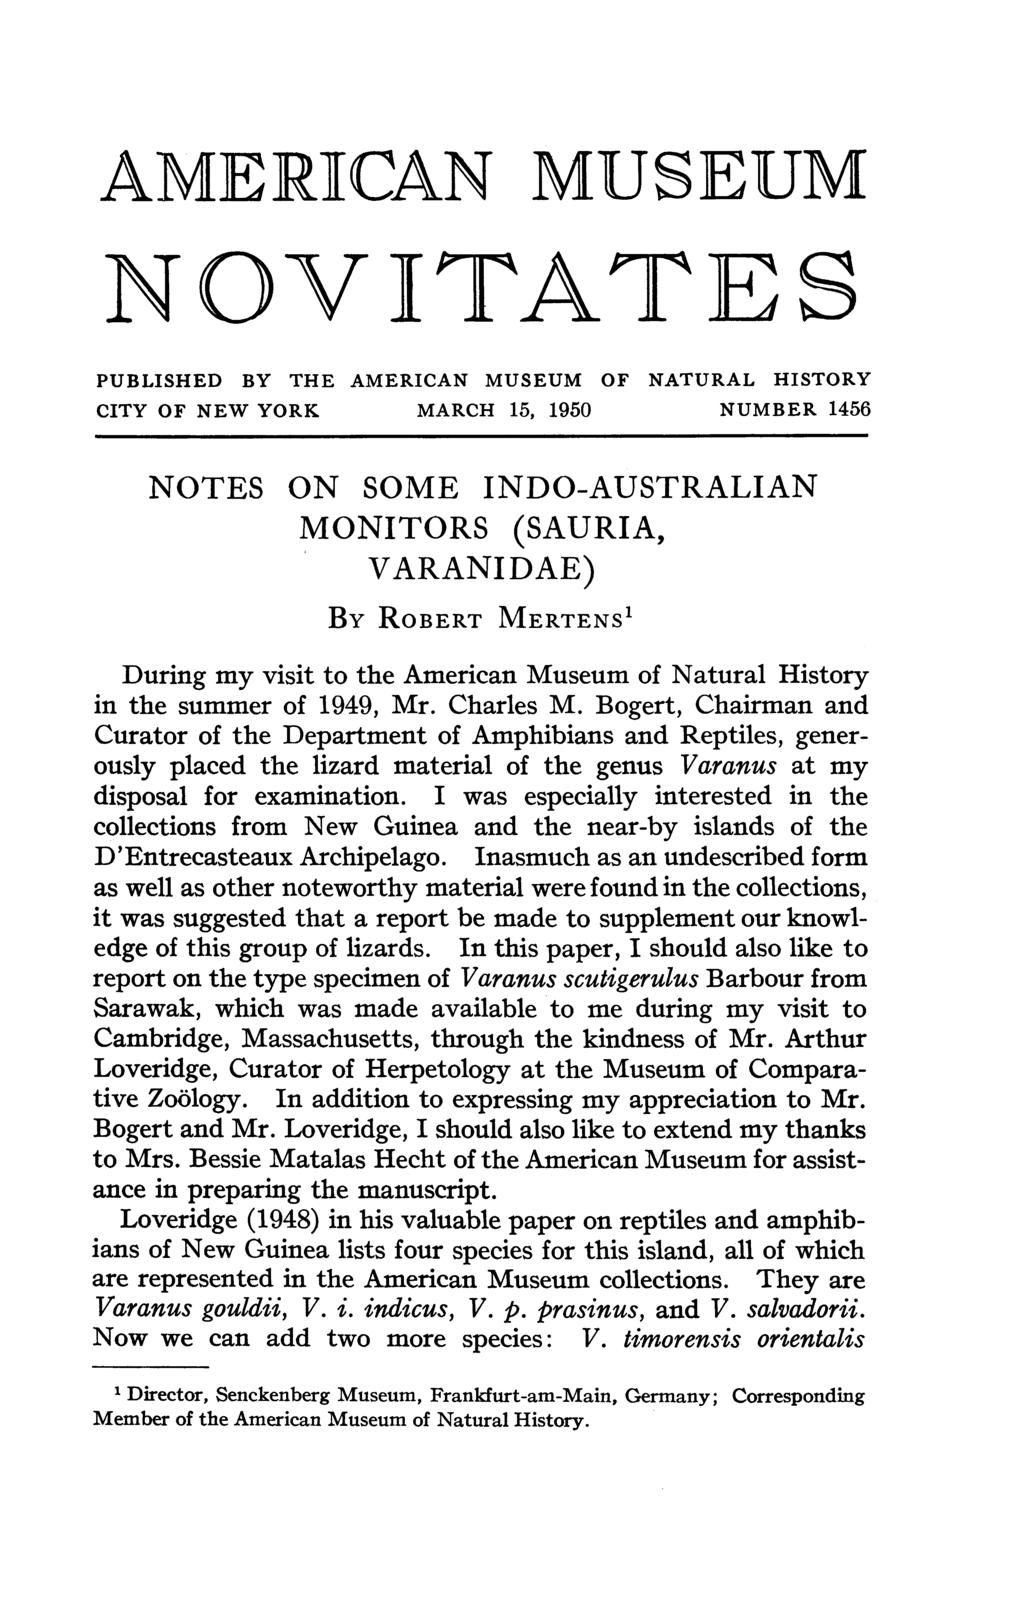 AMEIRiICAN MUSEUM NOVYITATES PUBLISHED BY THE AMERICAN MUSEUM OF NATURAL HISTORY CITY OF NEW YORK MARCH 15, 1950 NUMBER 1456 NOTES ON SOME INDO-AUSTRALIAN MONITORS (SAURIA, VARANI DAE) BY ROBERT